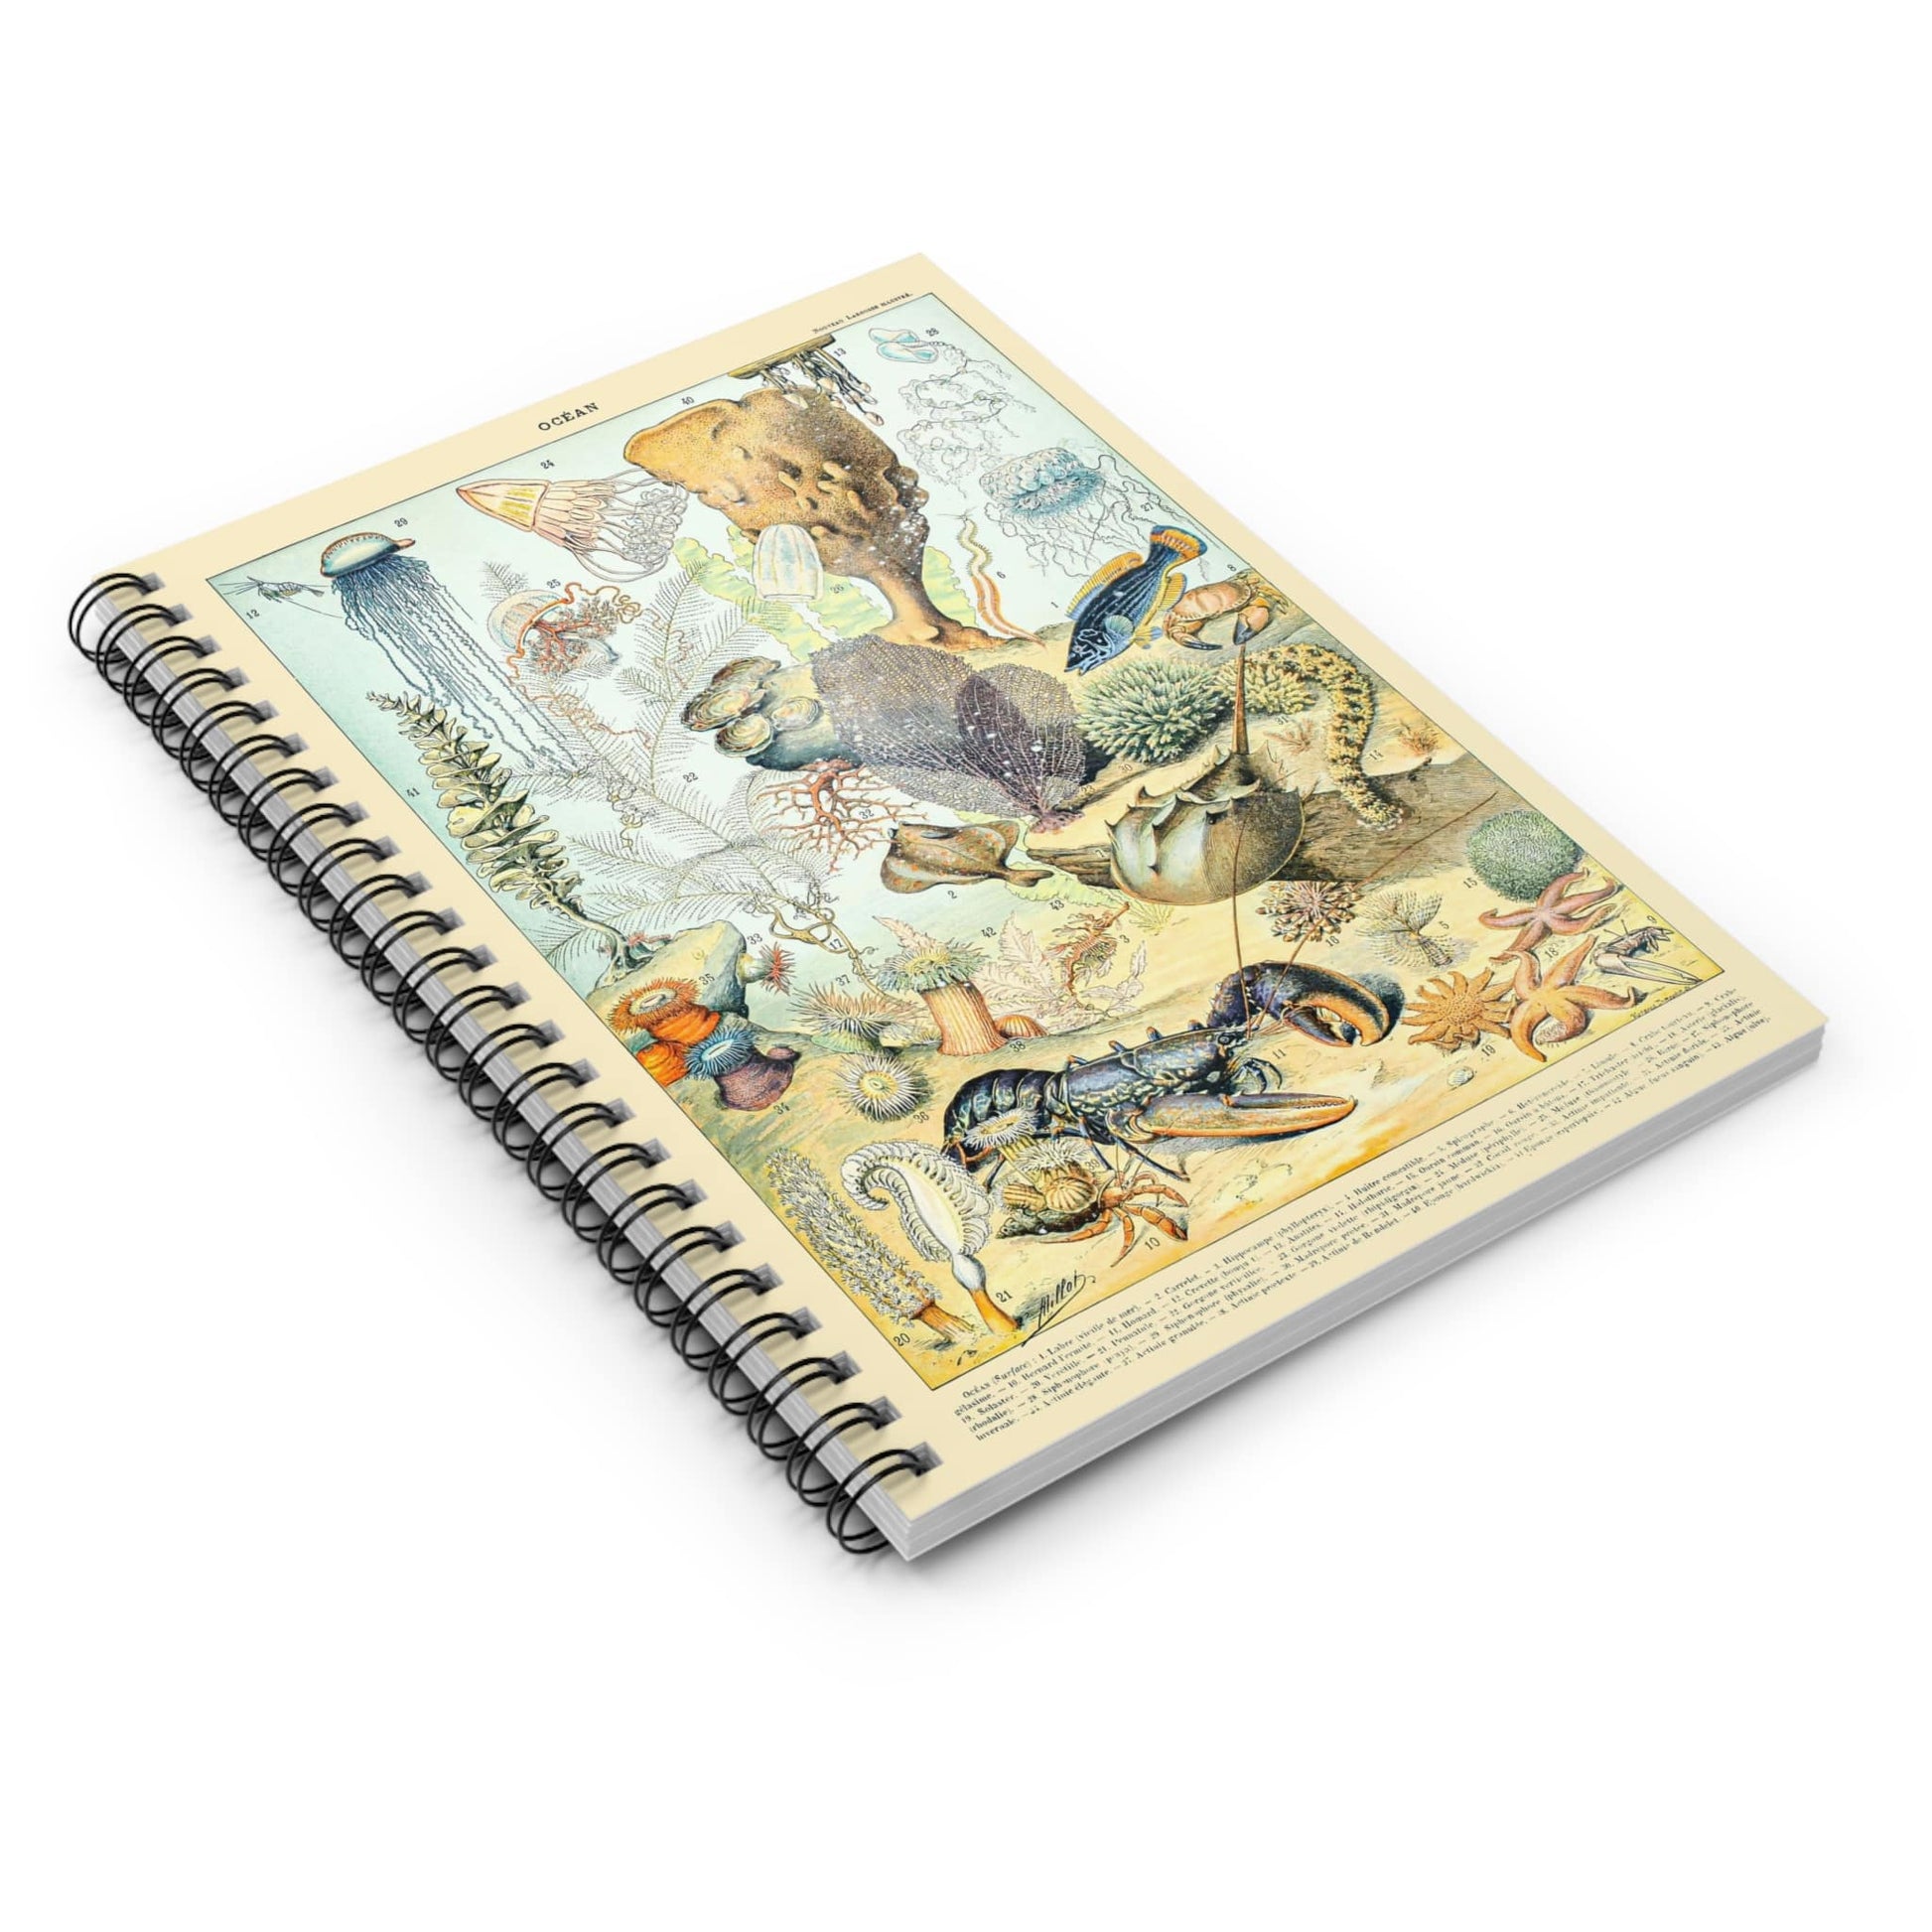 Corals and Jellyfish Spiral Notebook Laying Flat on White Surface